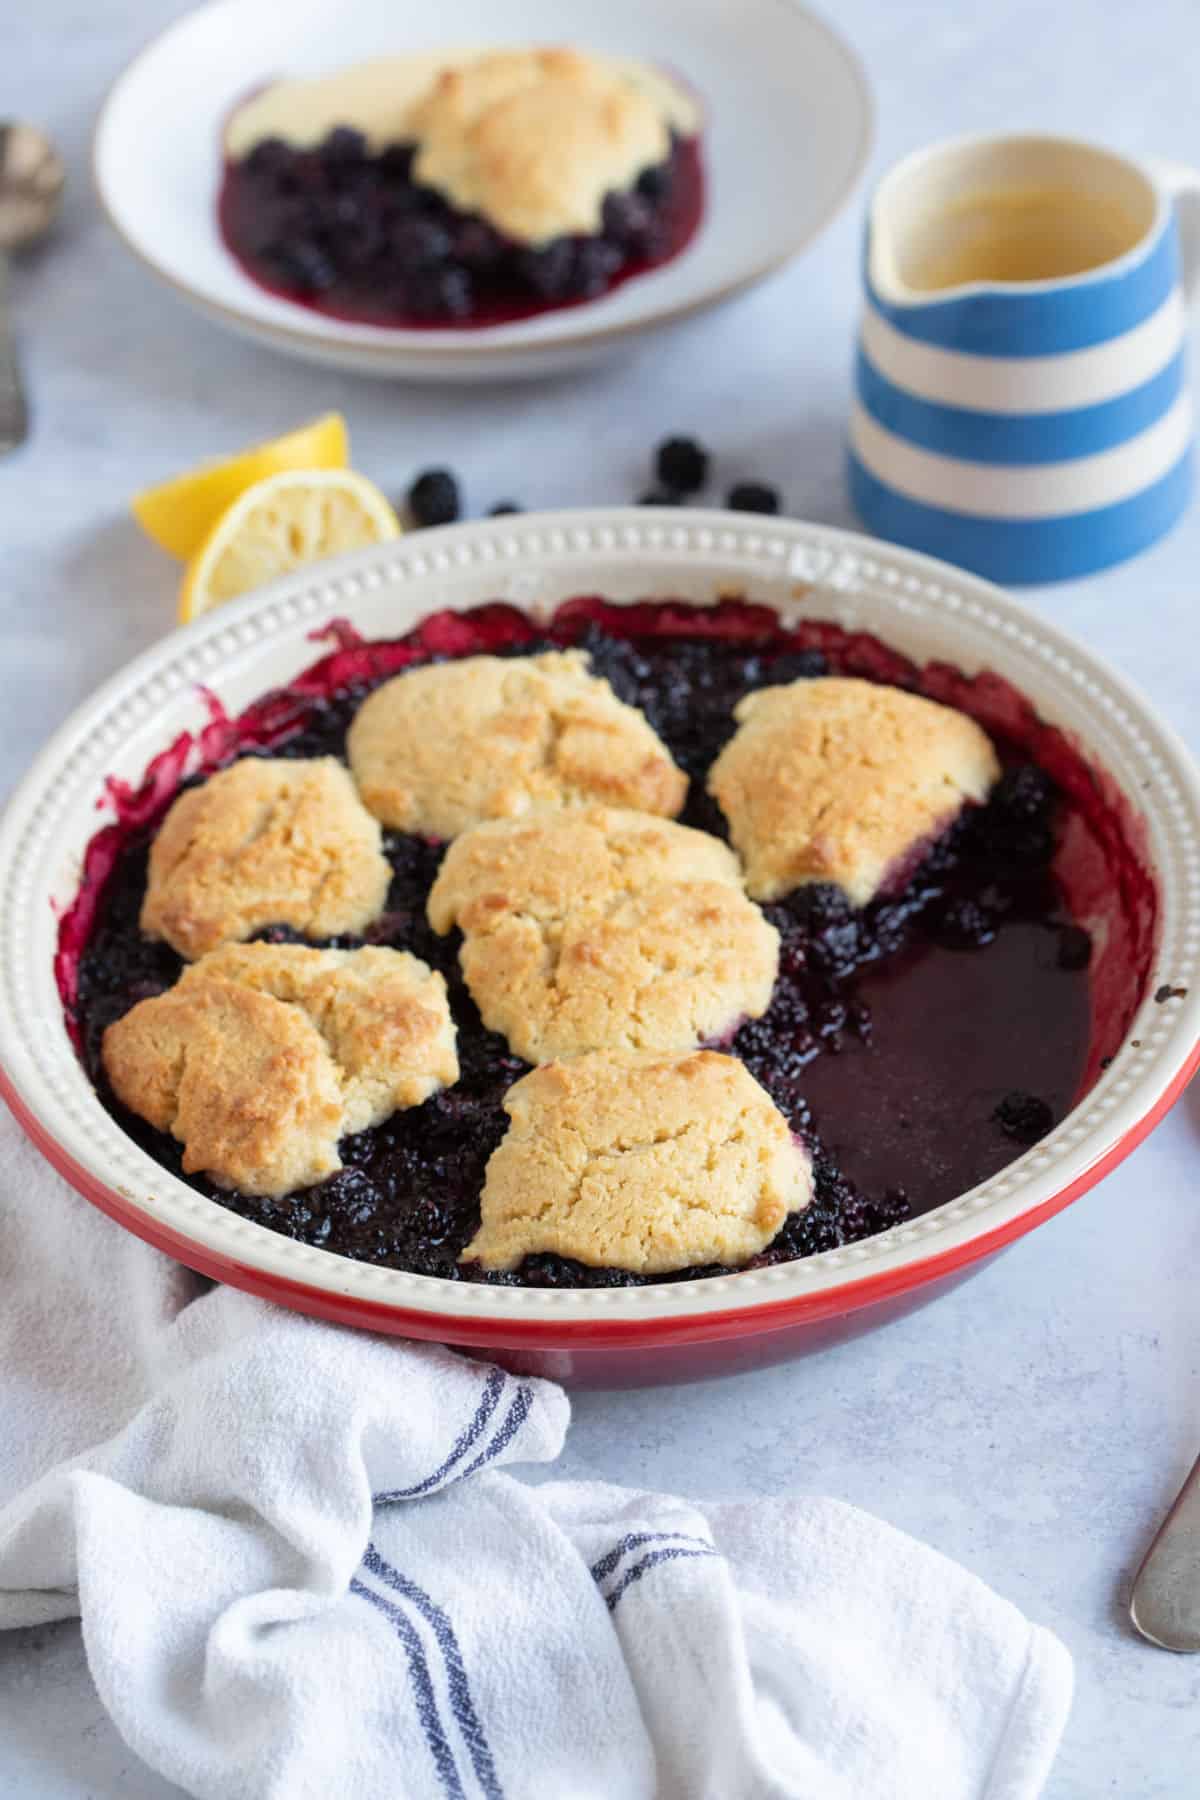 Blackberry cobbler in a pie dish with a jug of custard.